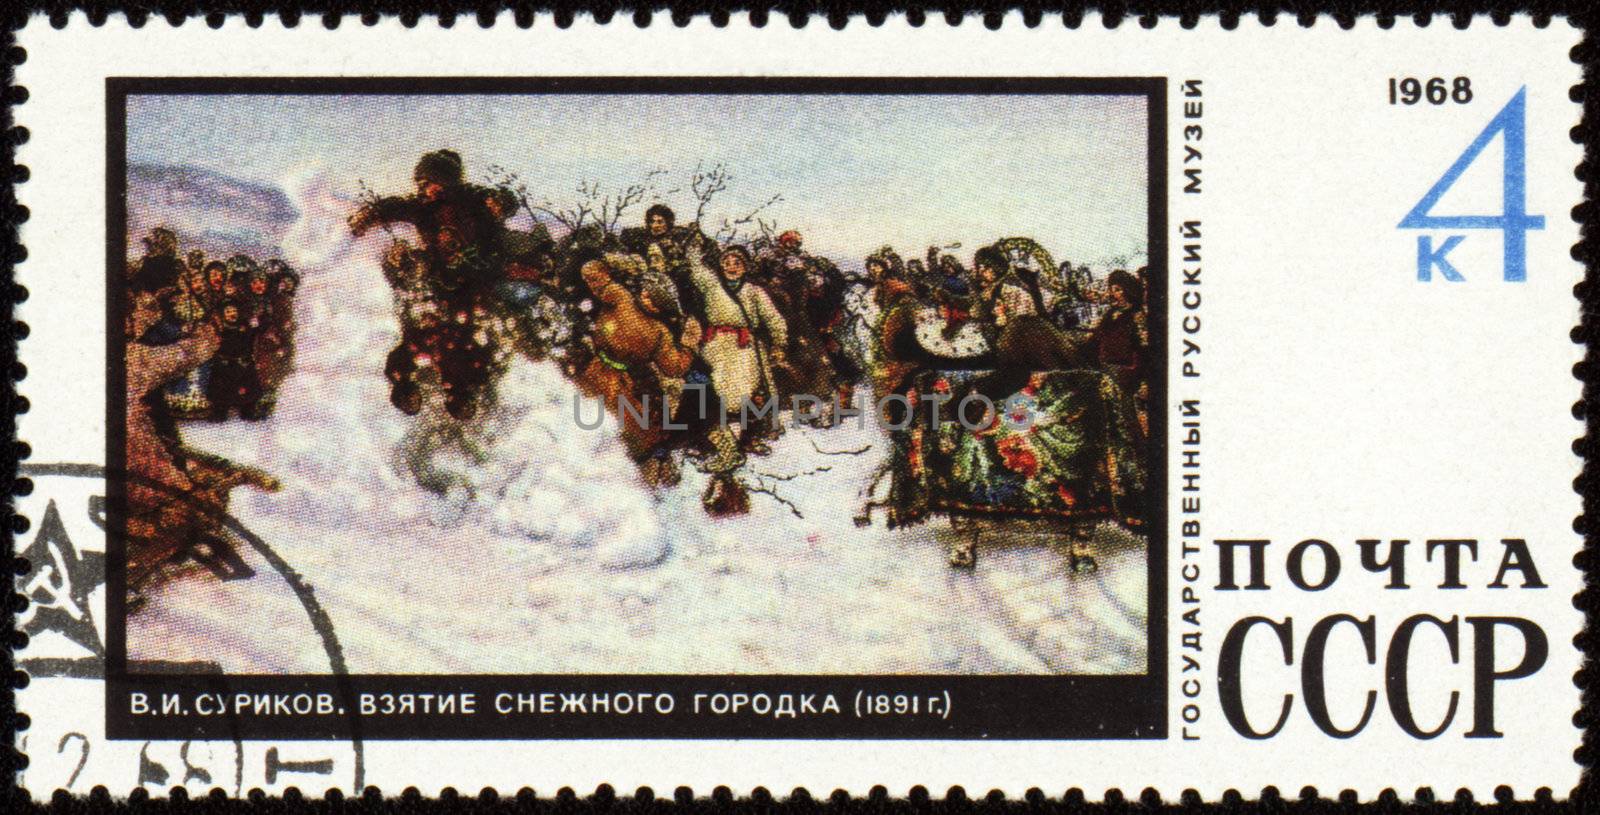 USSR - CIRCA 1968: A stamp printed in the USSR shows a painting "Storm of Snow Fortress" by Vasily Surikov, series "Russian Museum", circa 1968